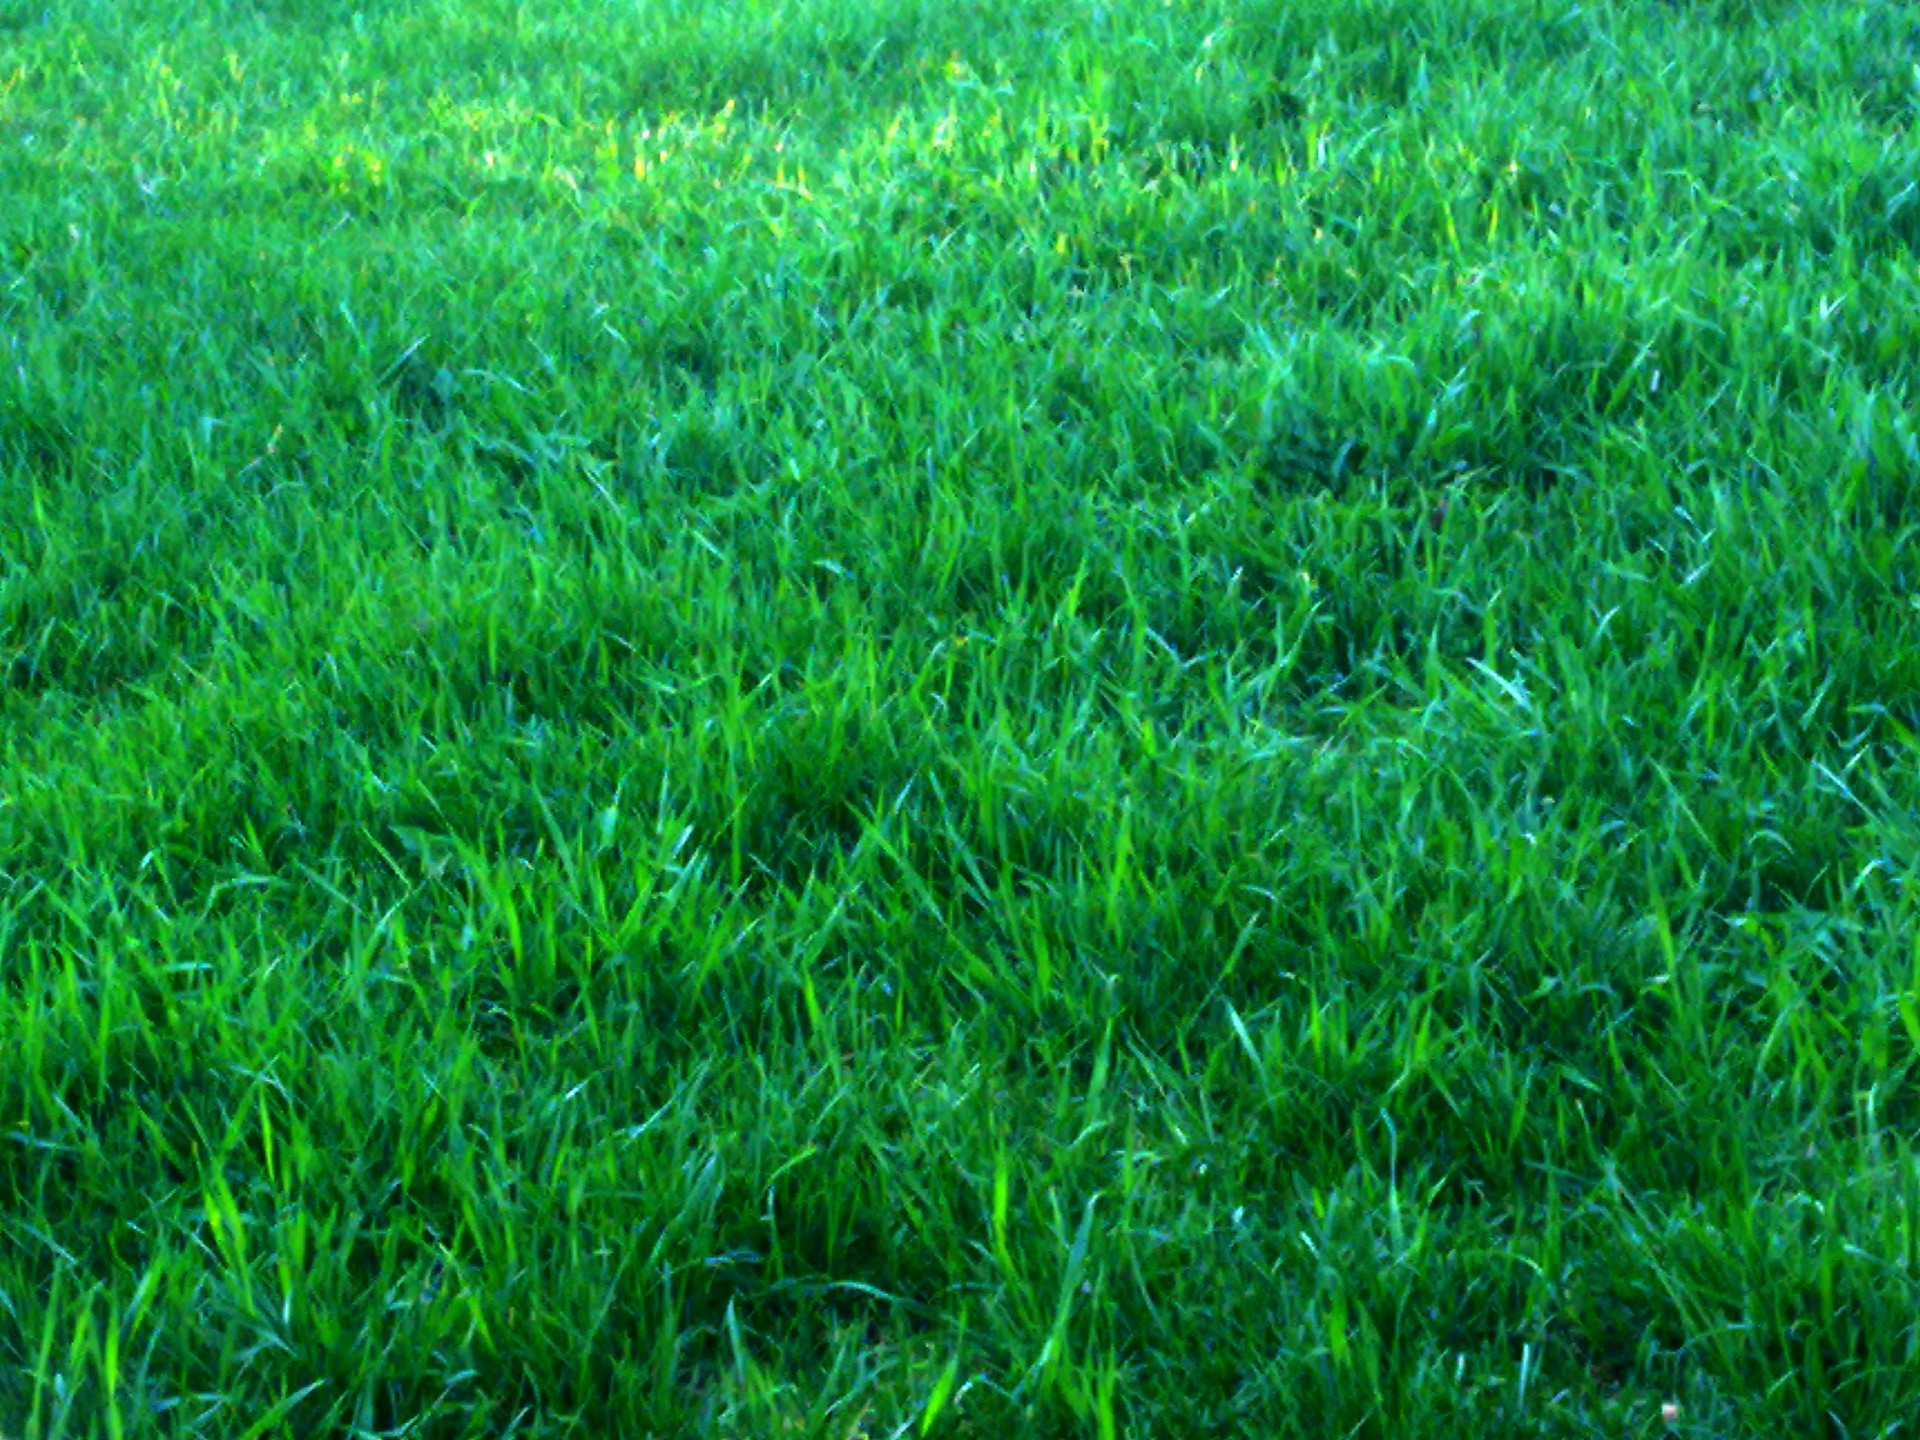 Green Grass Background Free Stock Photo Public Domain Pictures,Peach Schnapps